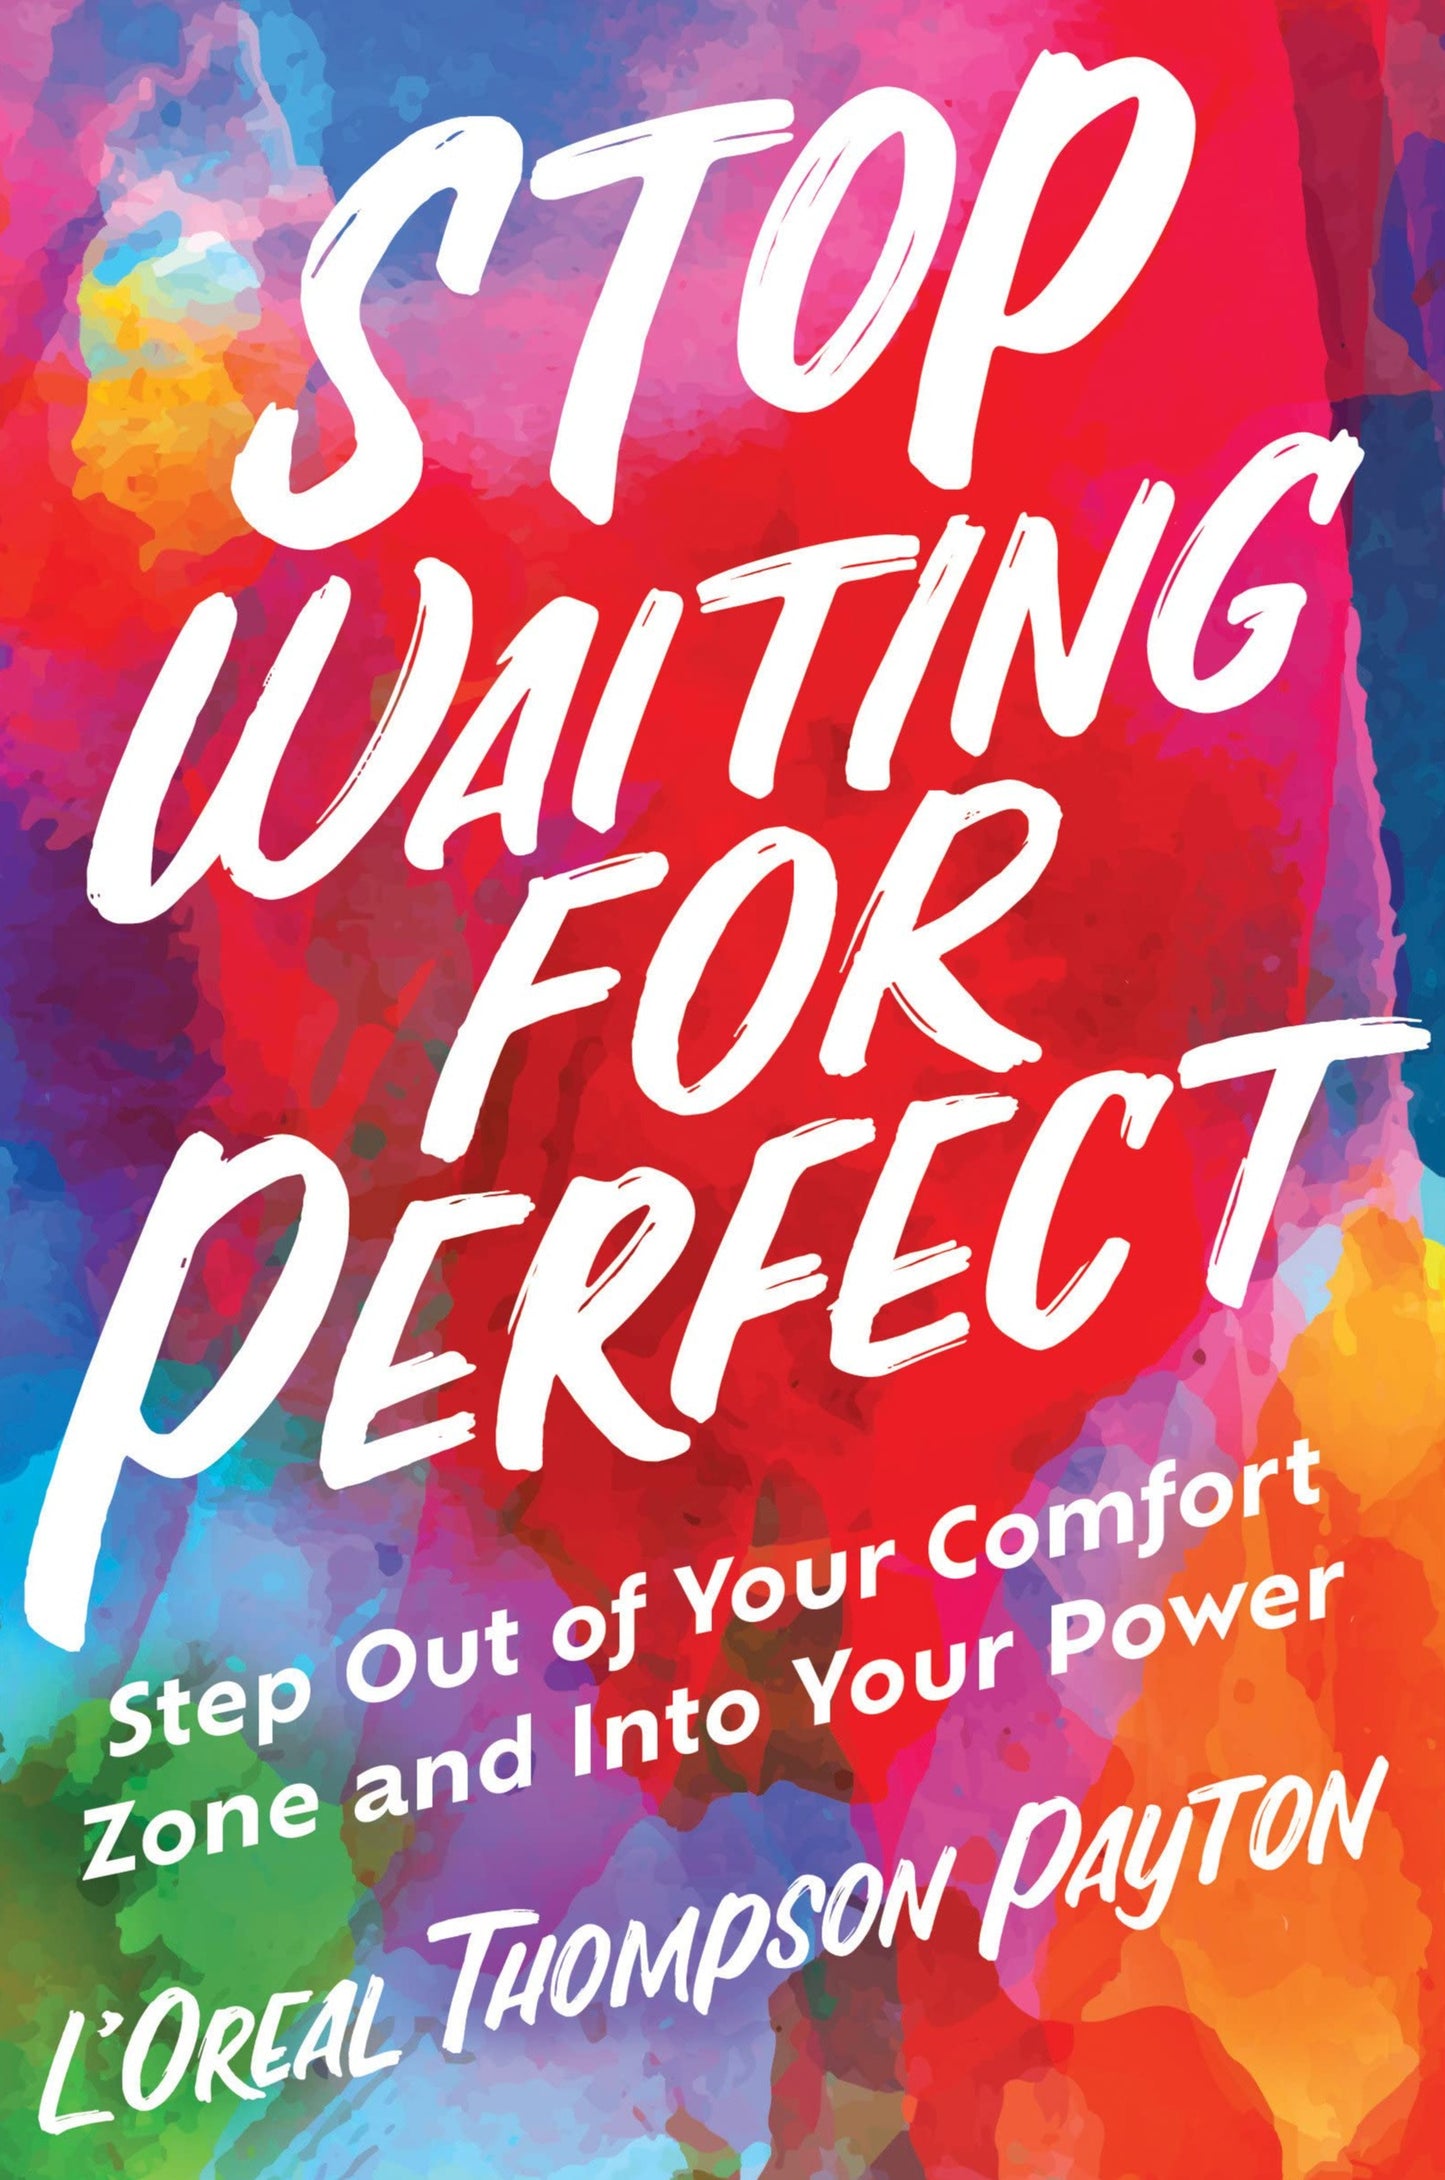 Stop Waiting for Perfect // Step Out of Your Comfort Zone and Into Your Power